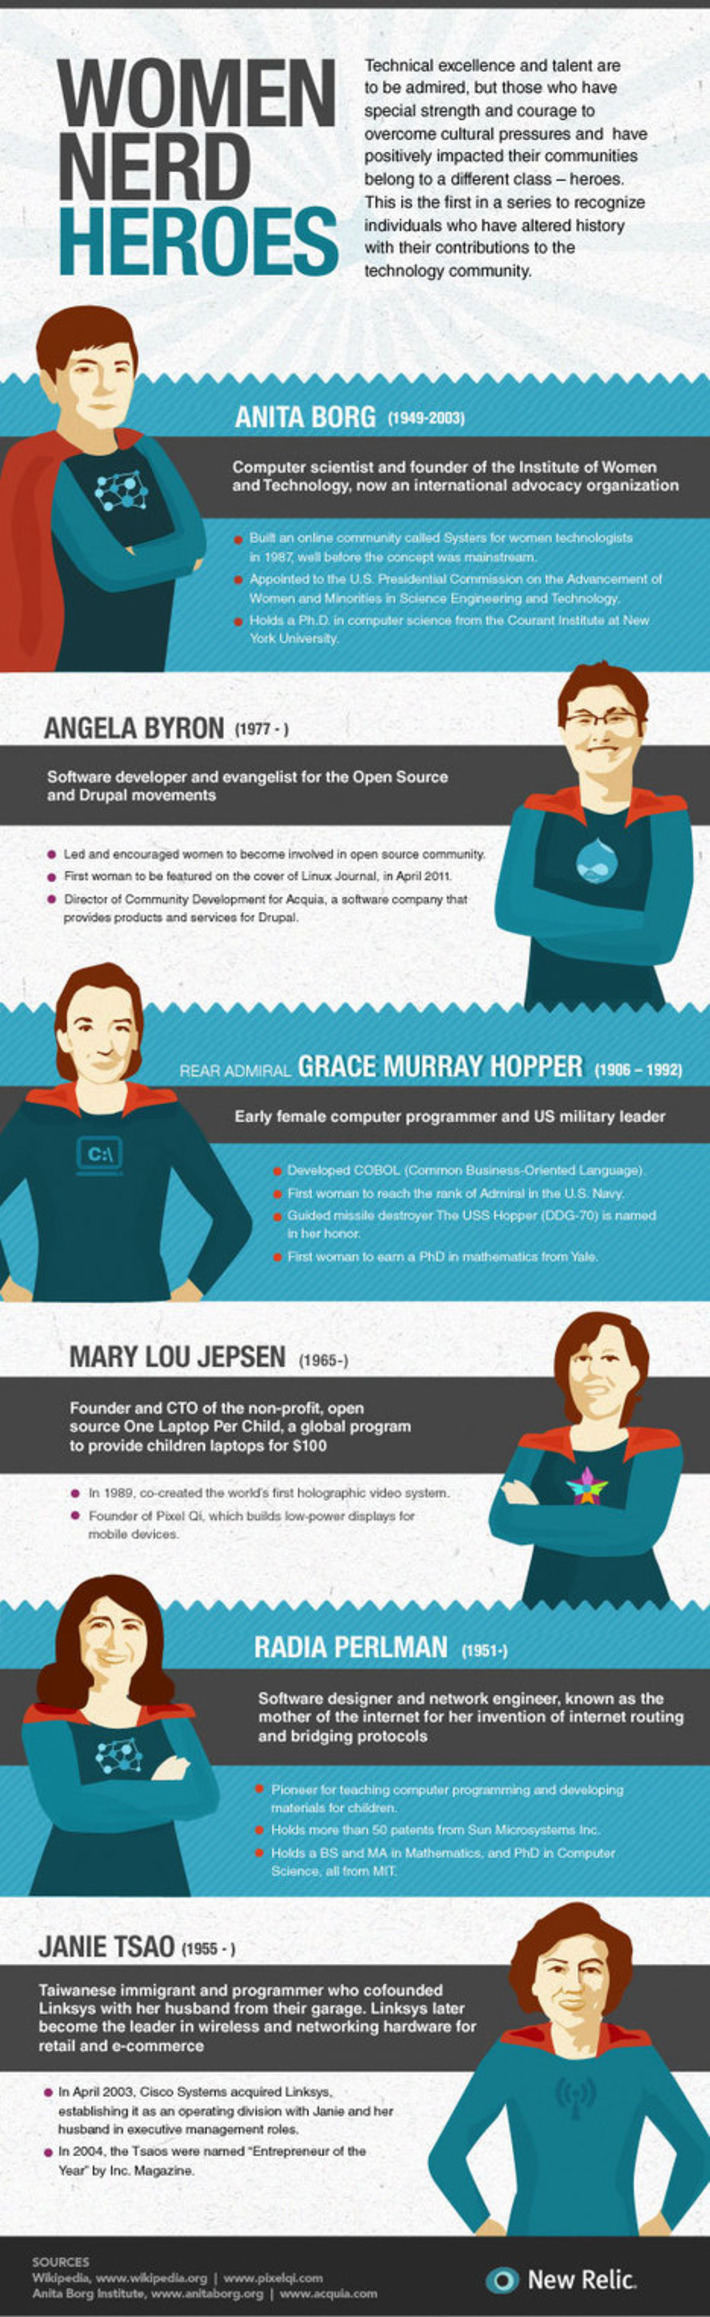 Forget Wonder Woman: These Women Nerds Are Our Real Superheroes | Nerdy Needs | Scoop.it